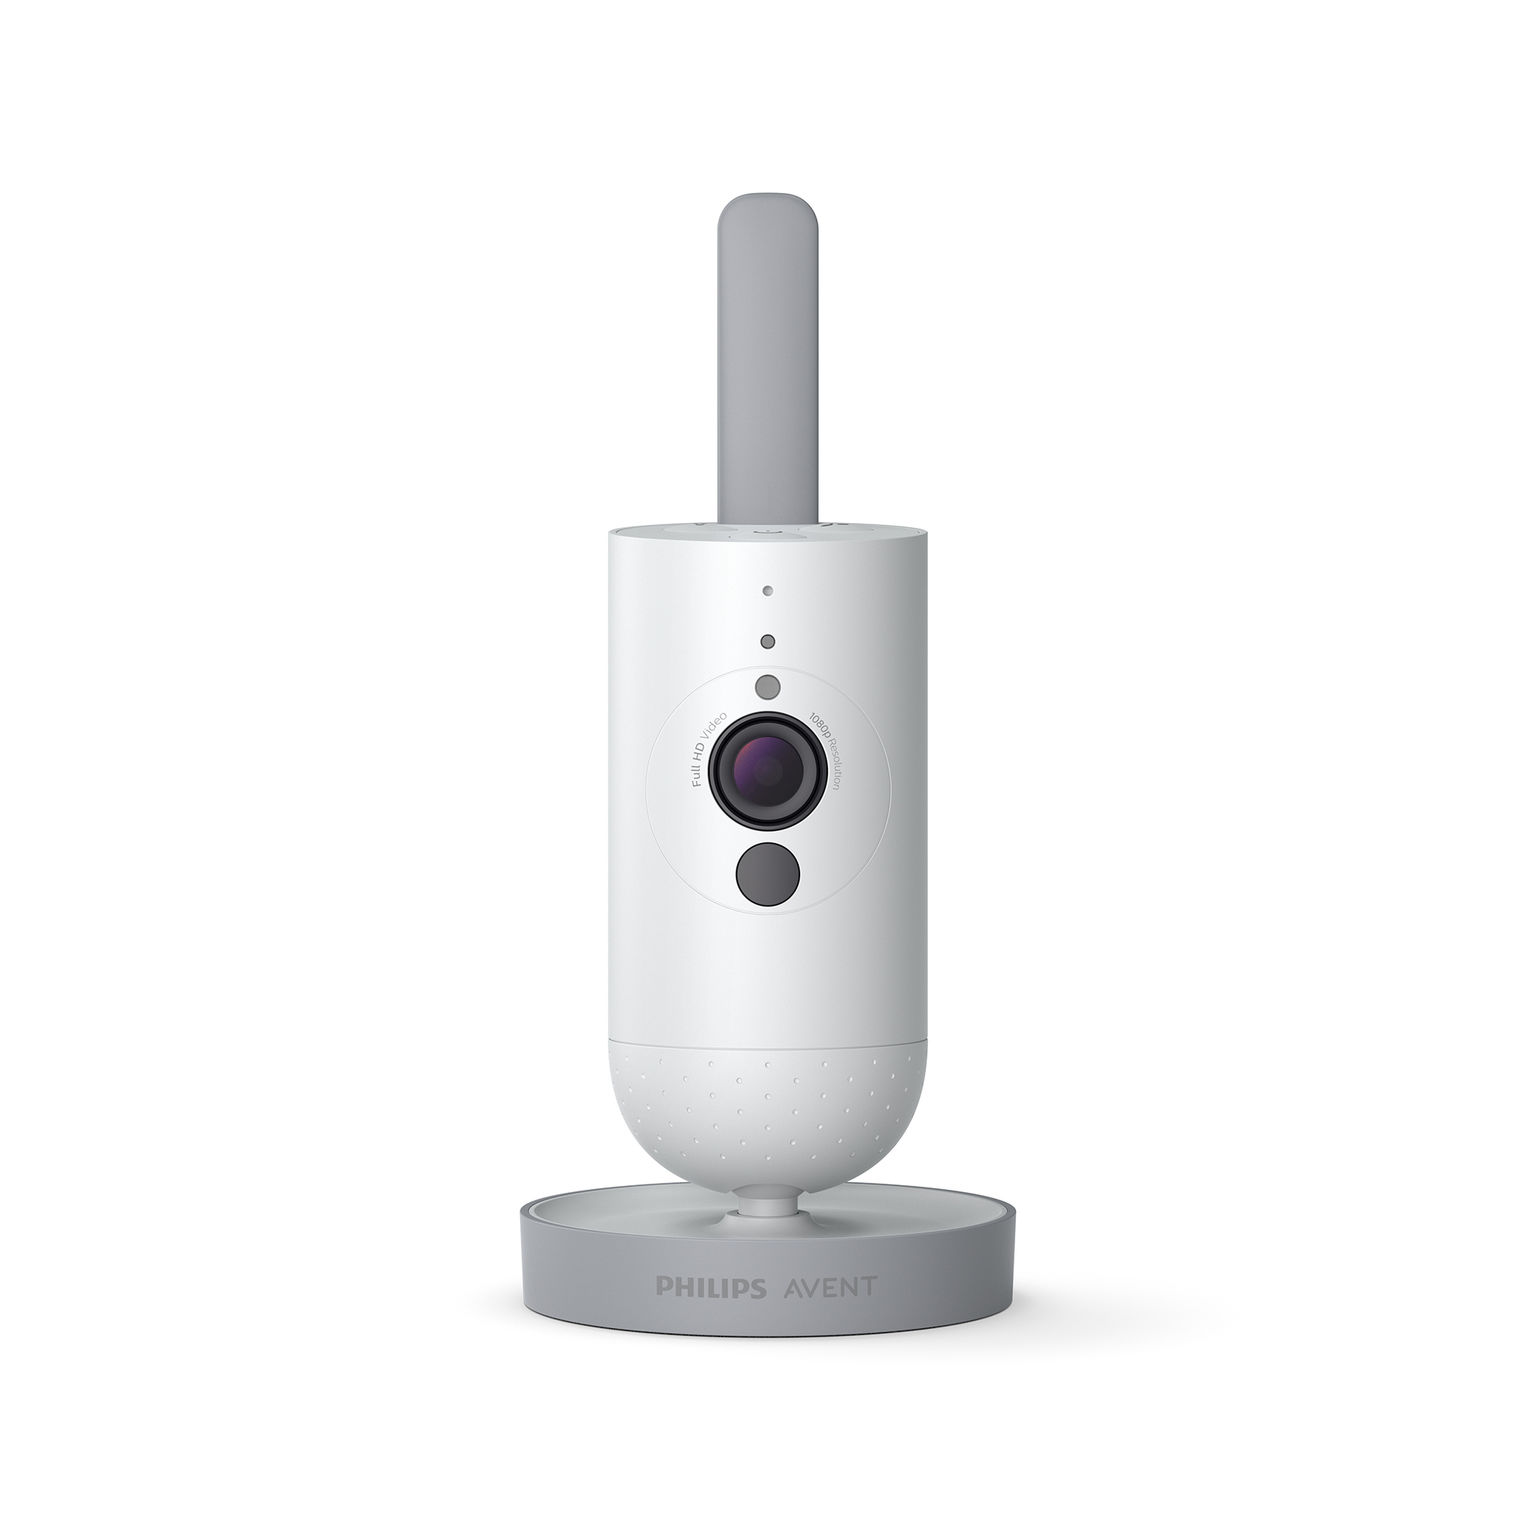 Philips Avent Night Owl Connected baby/video monitor